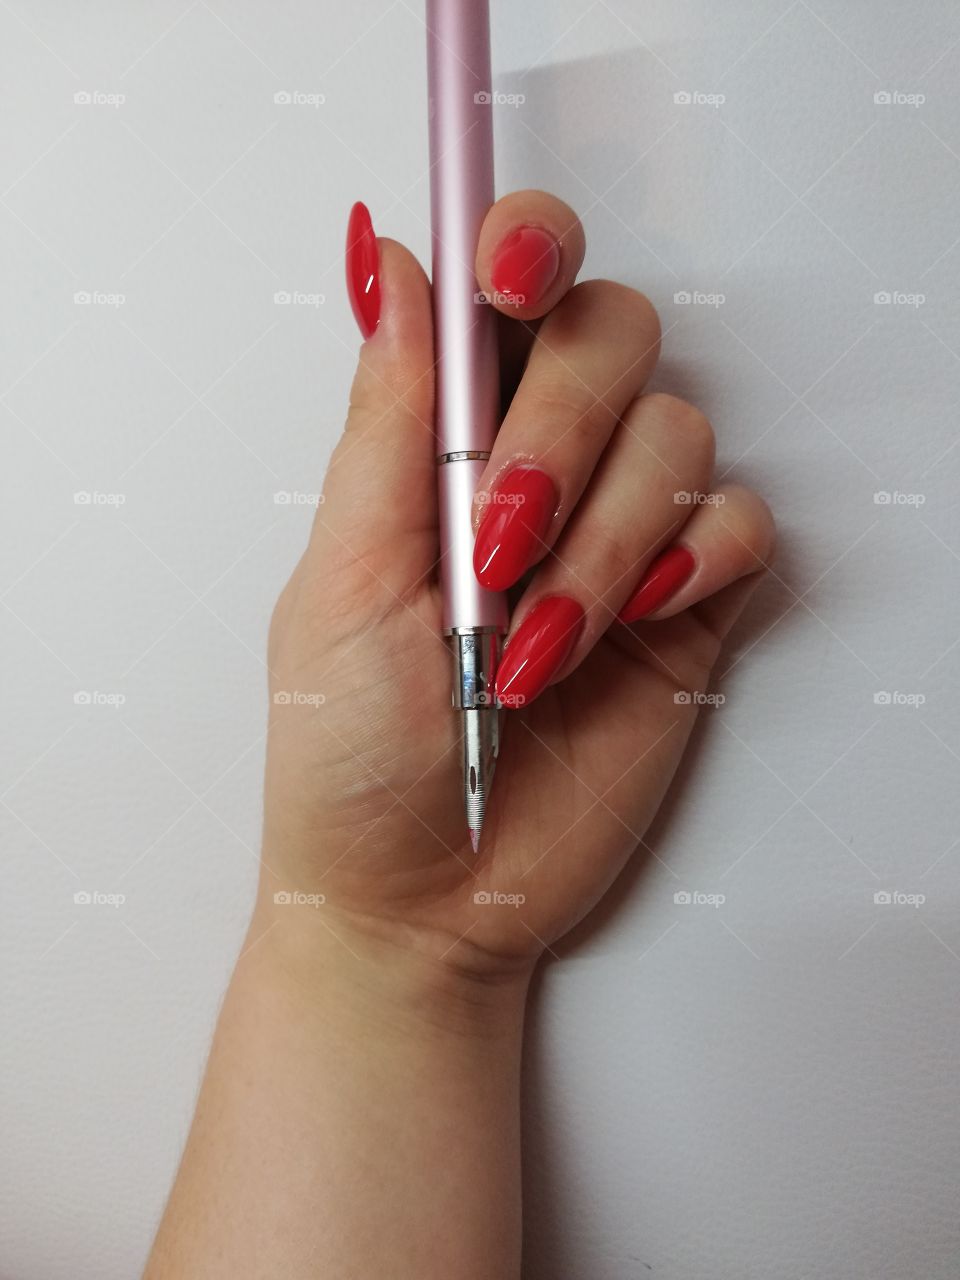 Long, red nails with stylograph